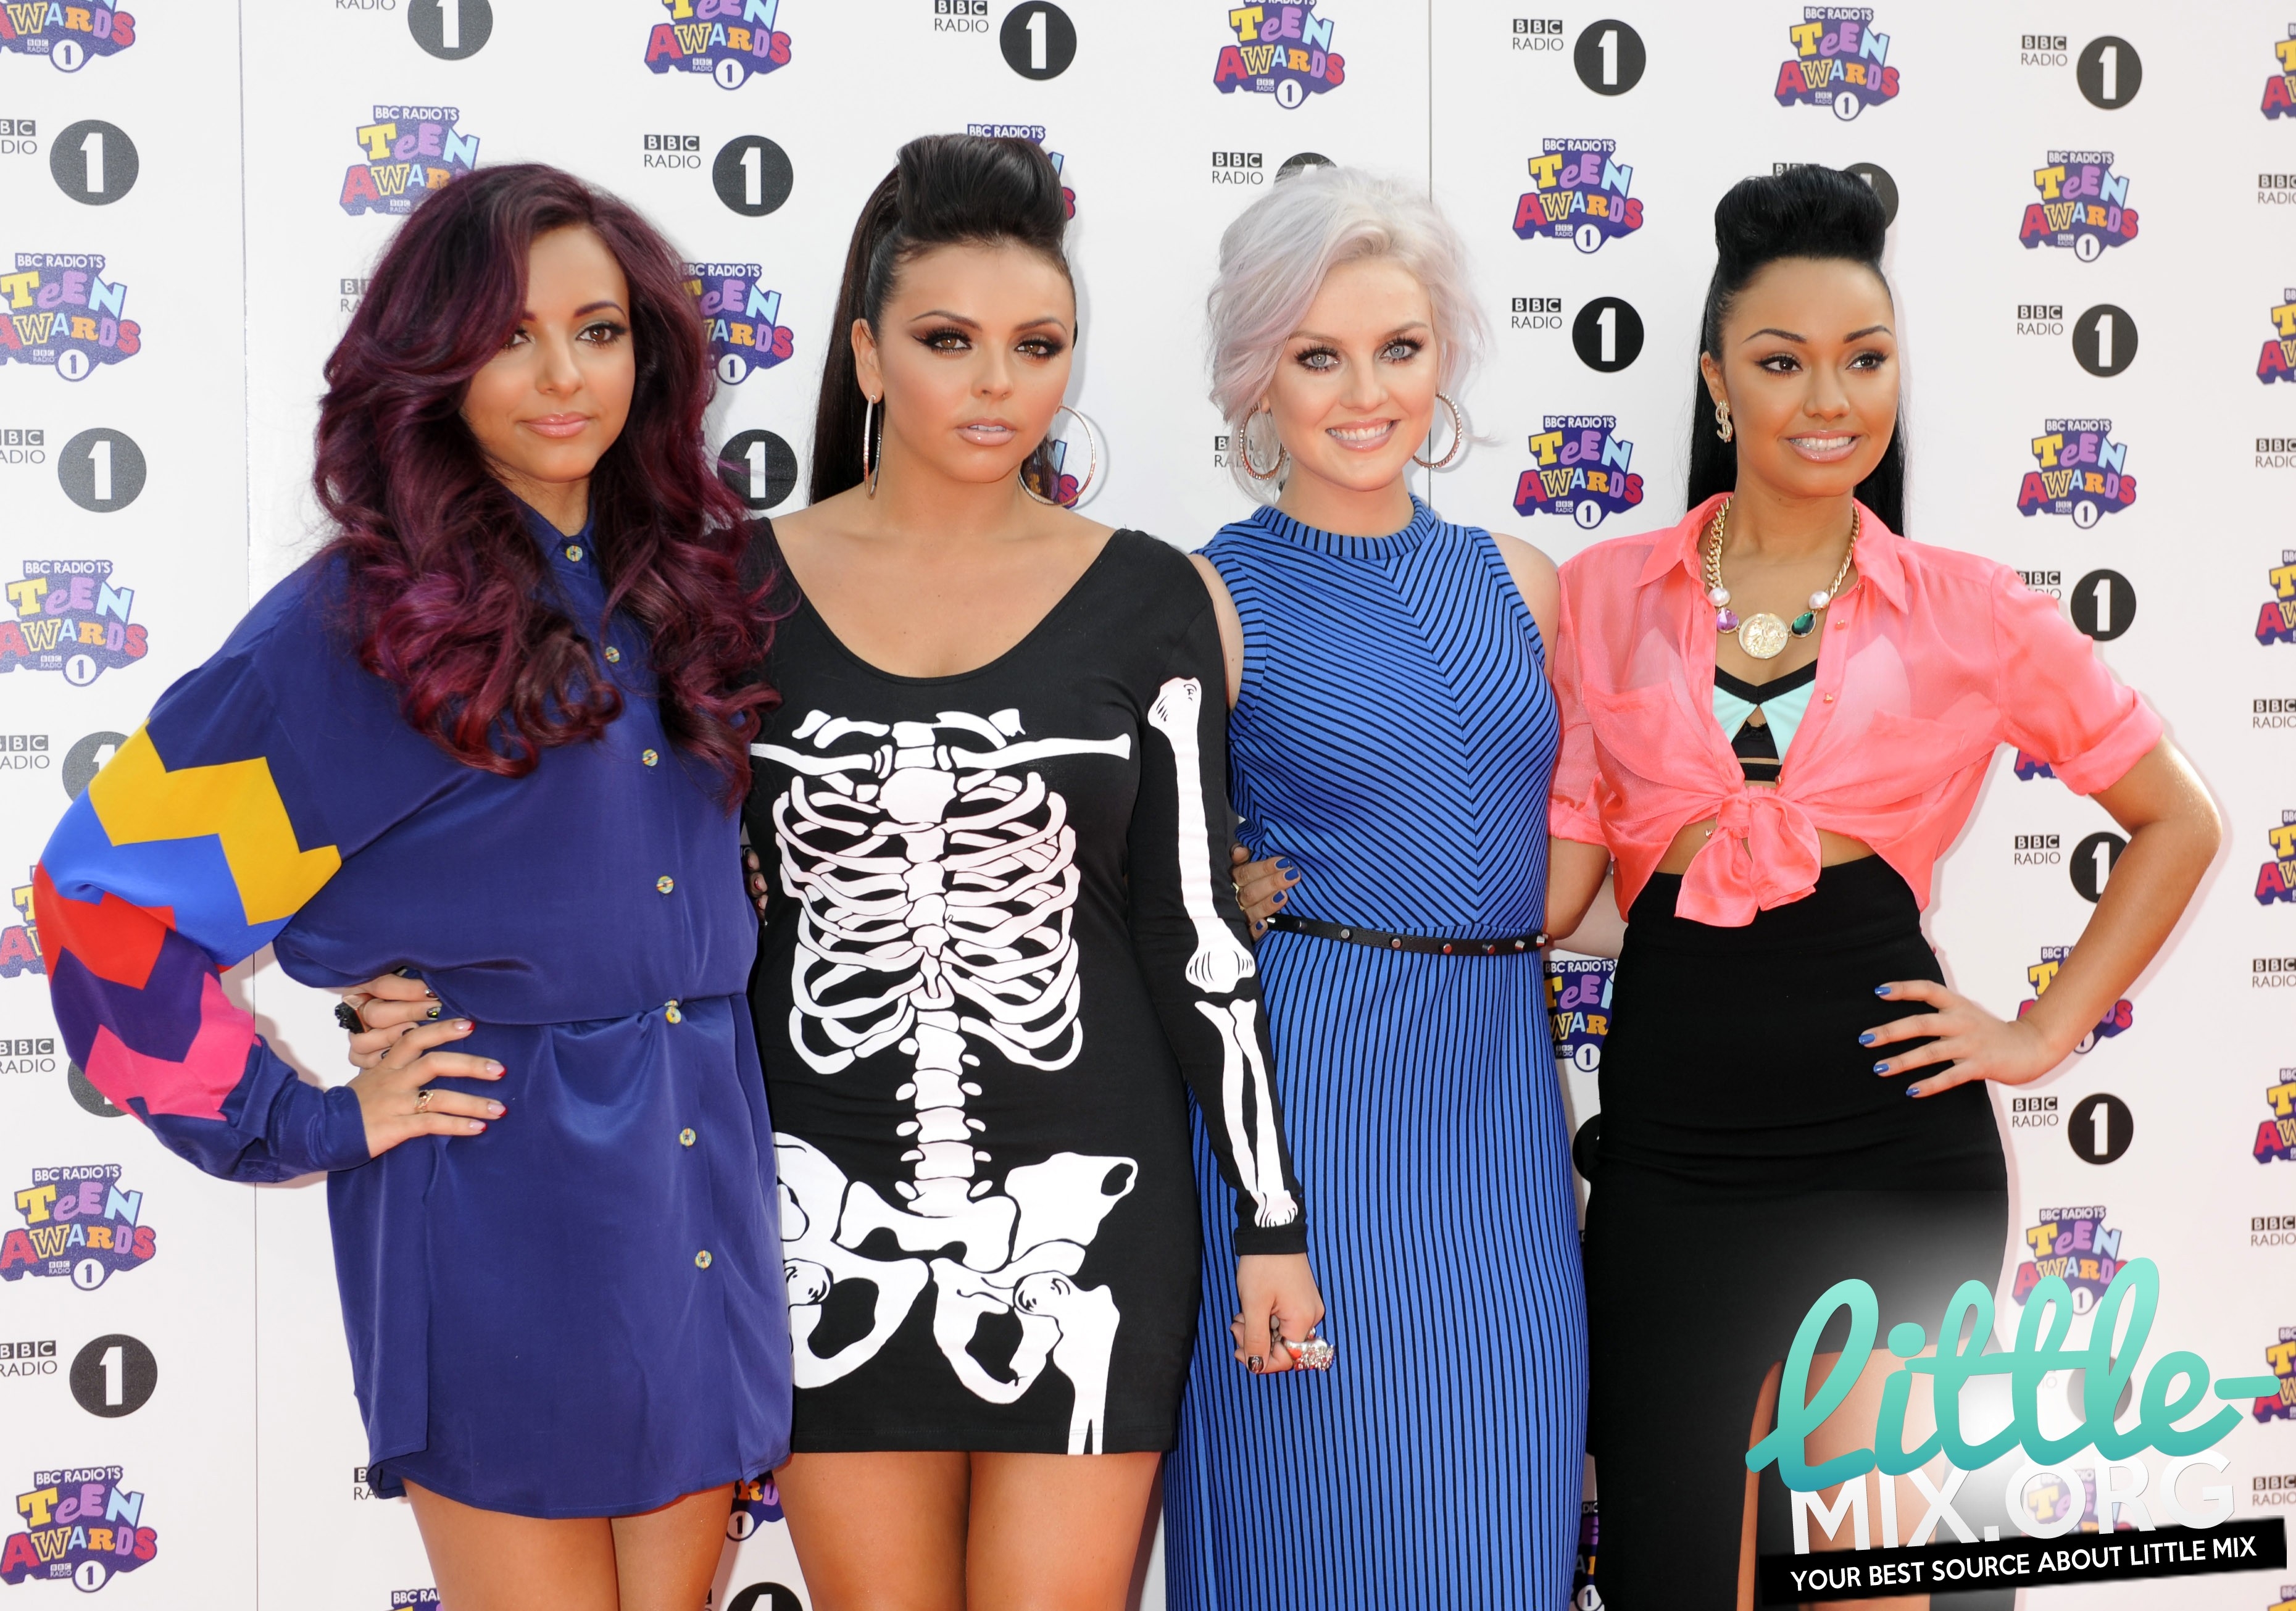 Little Mix attend the BBC Radio 1 Teen Awards - 07/10/12. {HQ} - little-mix Photo